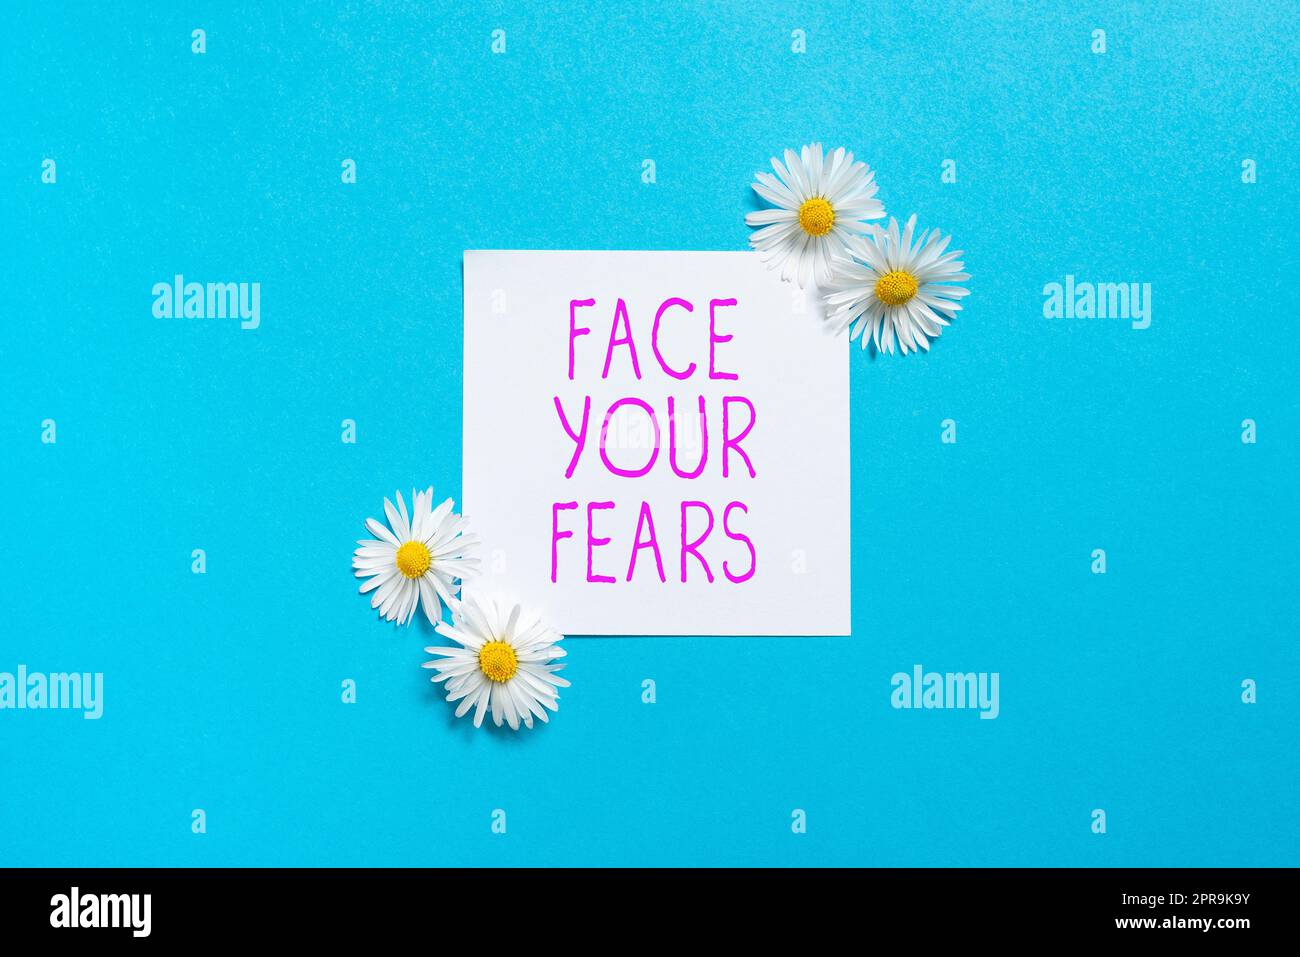 Text showing inspiration Face Your Fears. Internet Concept Have the courage to overcome anxiety be brave fearless Sticky Note With Important Messages With Flowers On Both Sides. Stock Photo